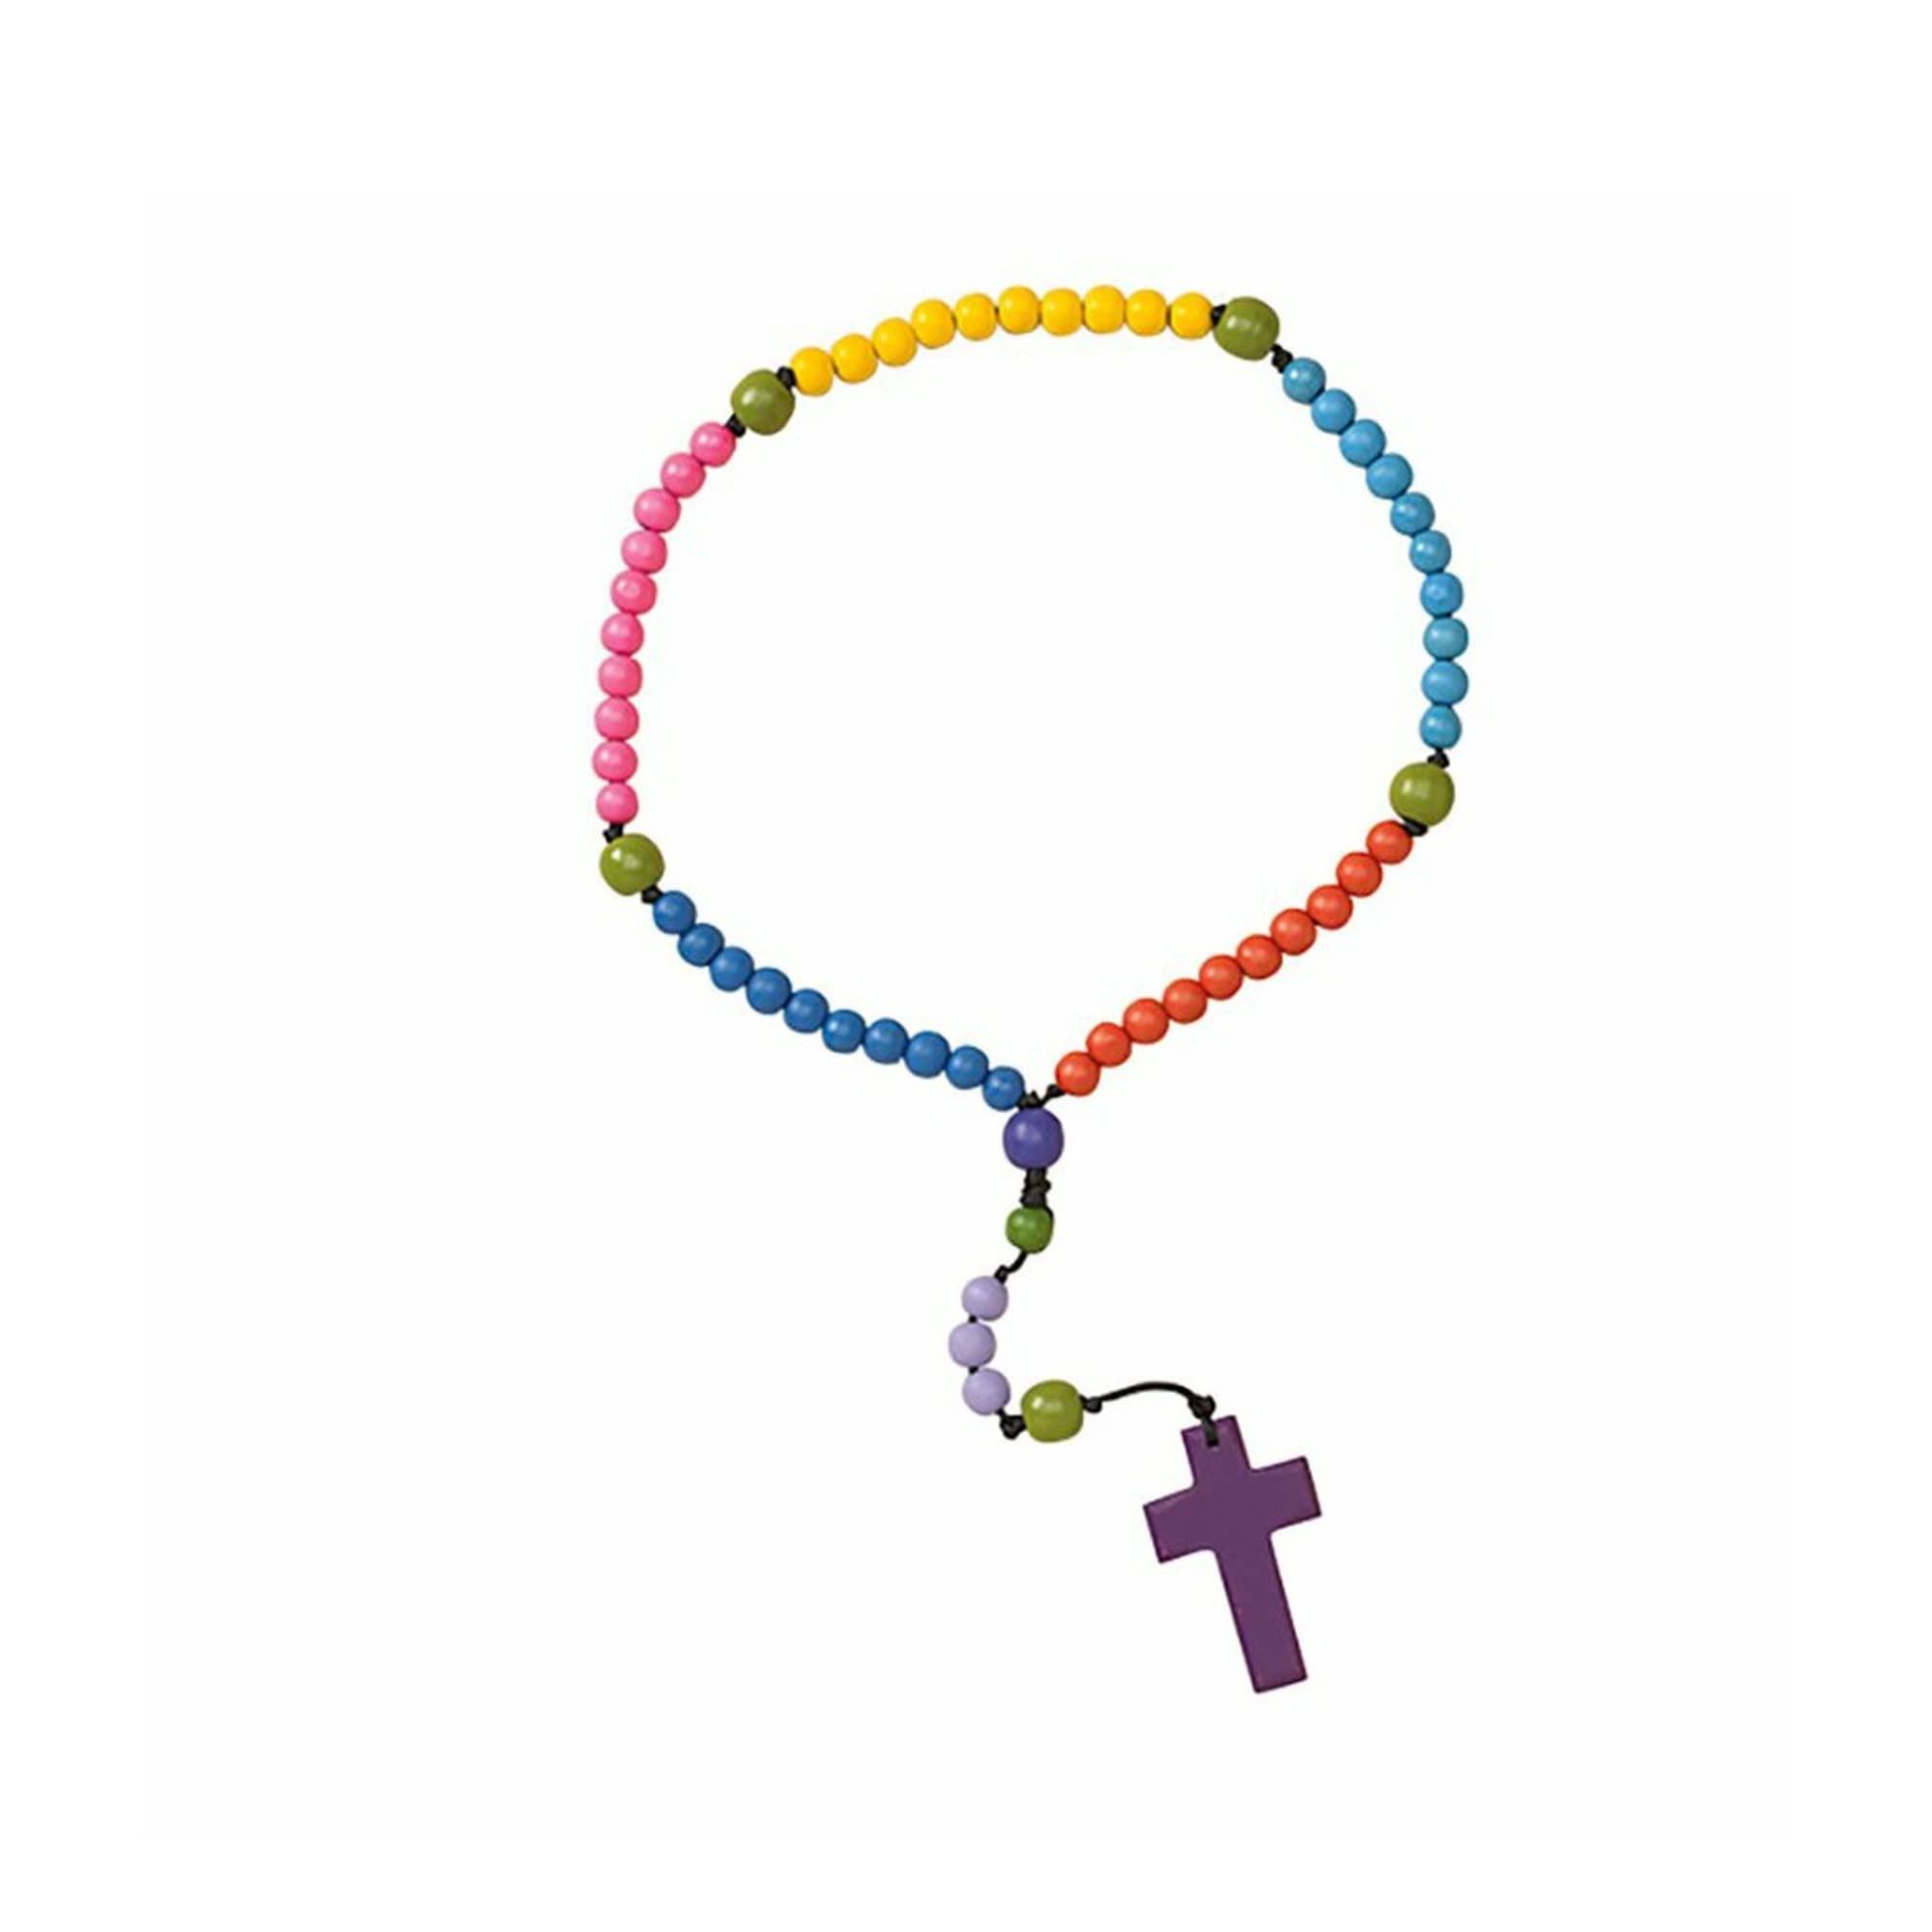 Ddi Make-Your-Own Beaded Rosary Craft Kit - image 4 of 4